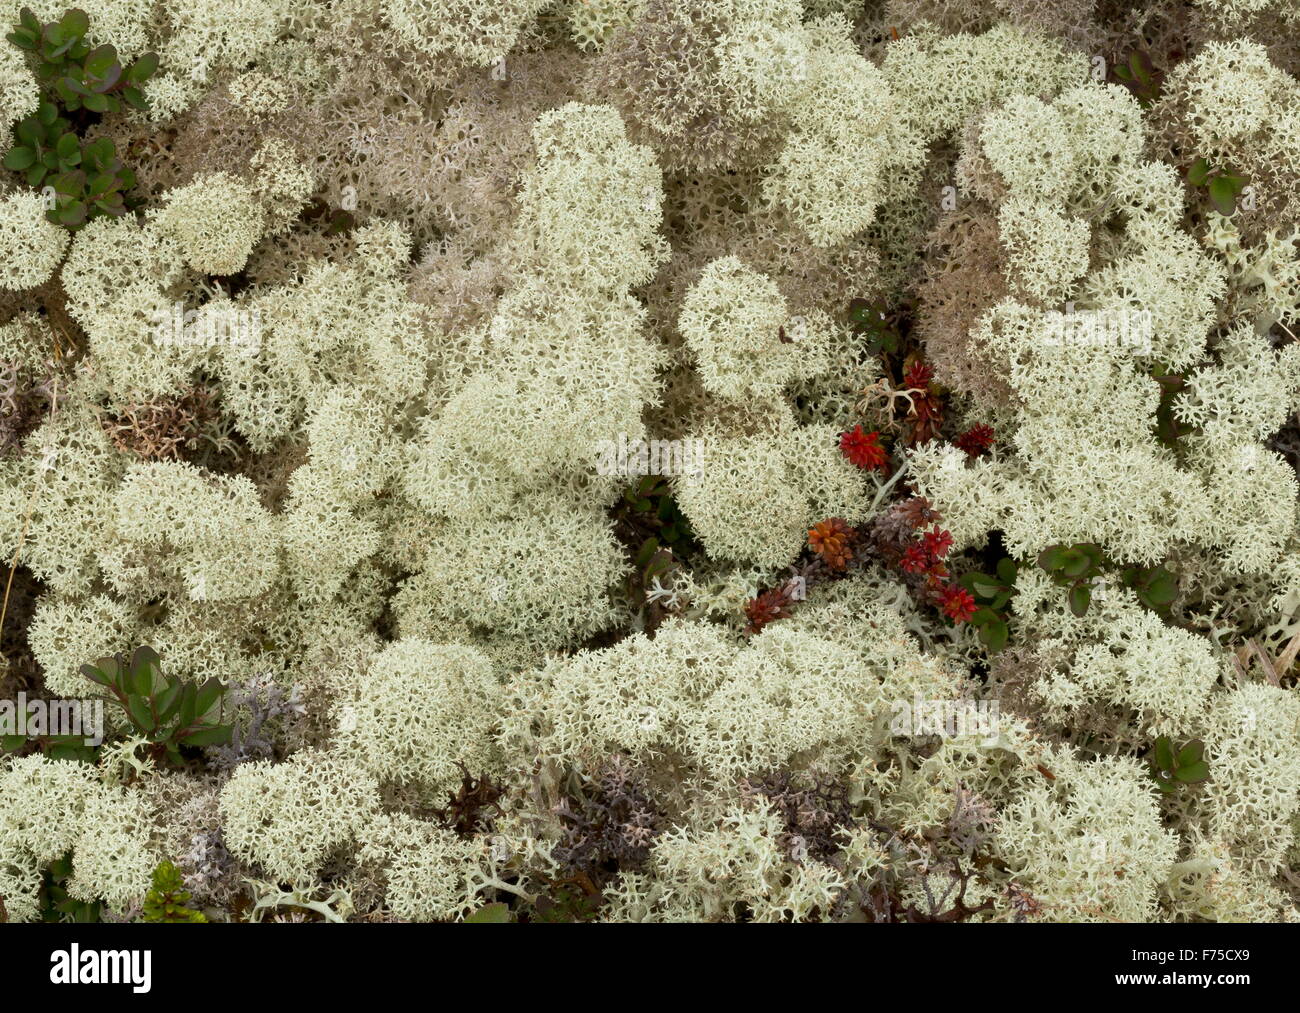 Boreal tundra dominated by a lichen, Cladonia stellaris, with crowberry etc. North Newfoundland. Stock Photo